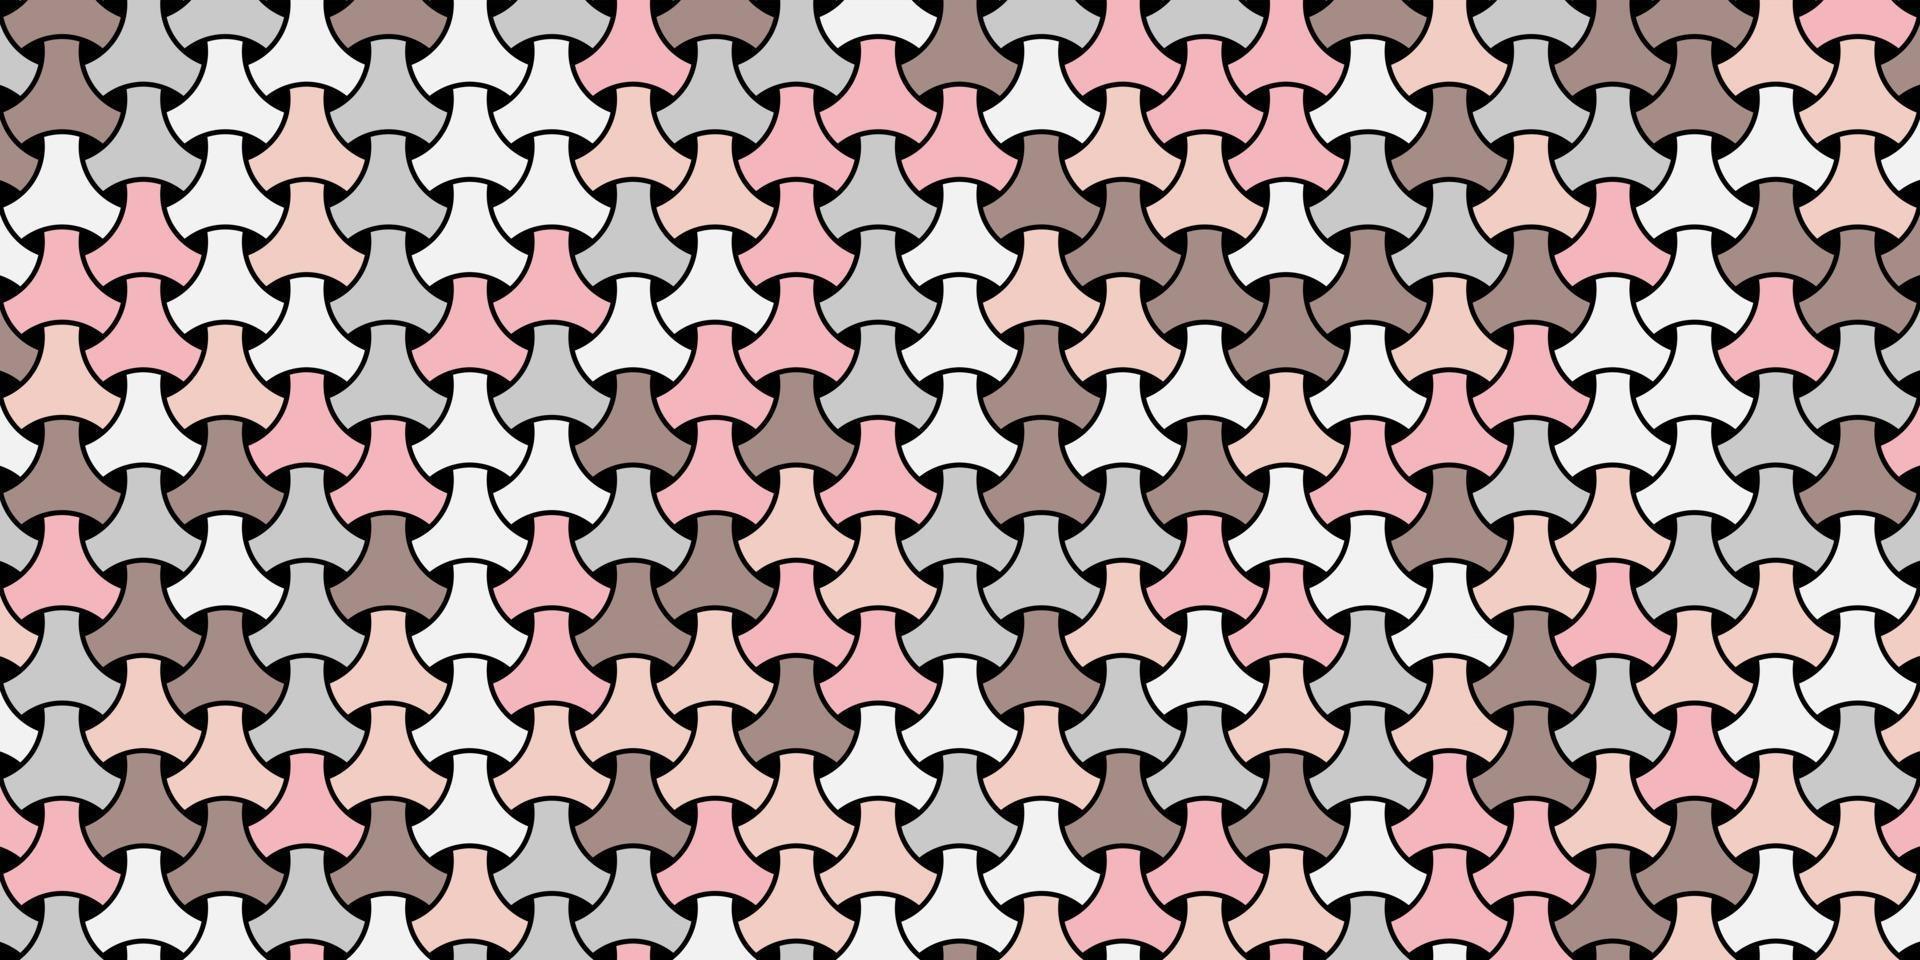 apanese or chinese fabric traditional background origami paper style vector